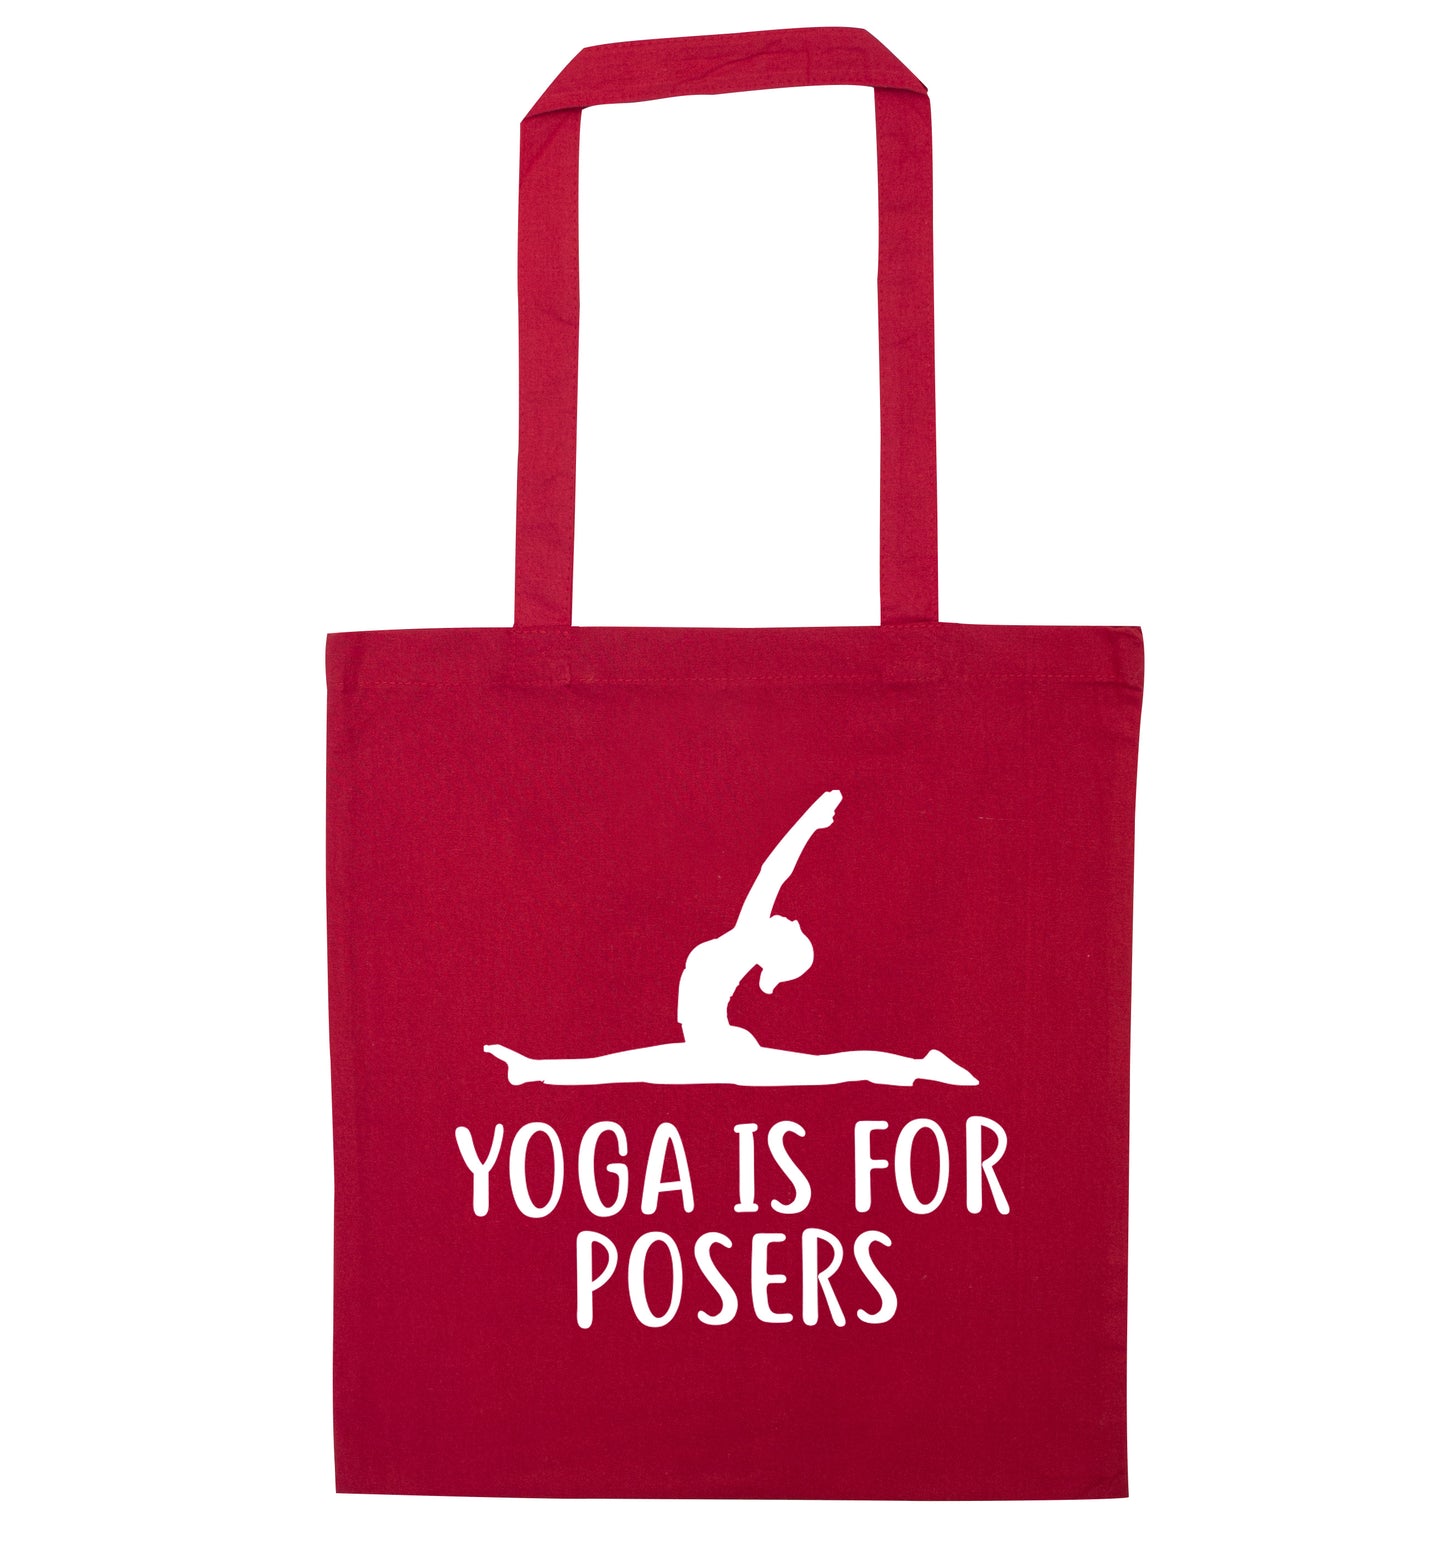 Yoga is for posers red tote bag